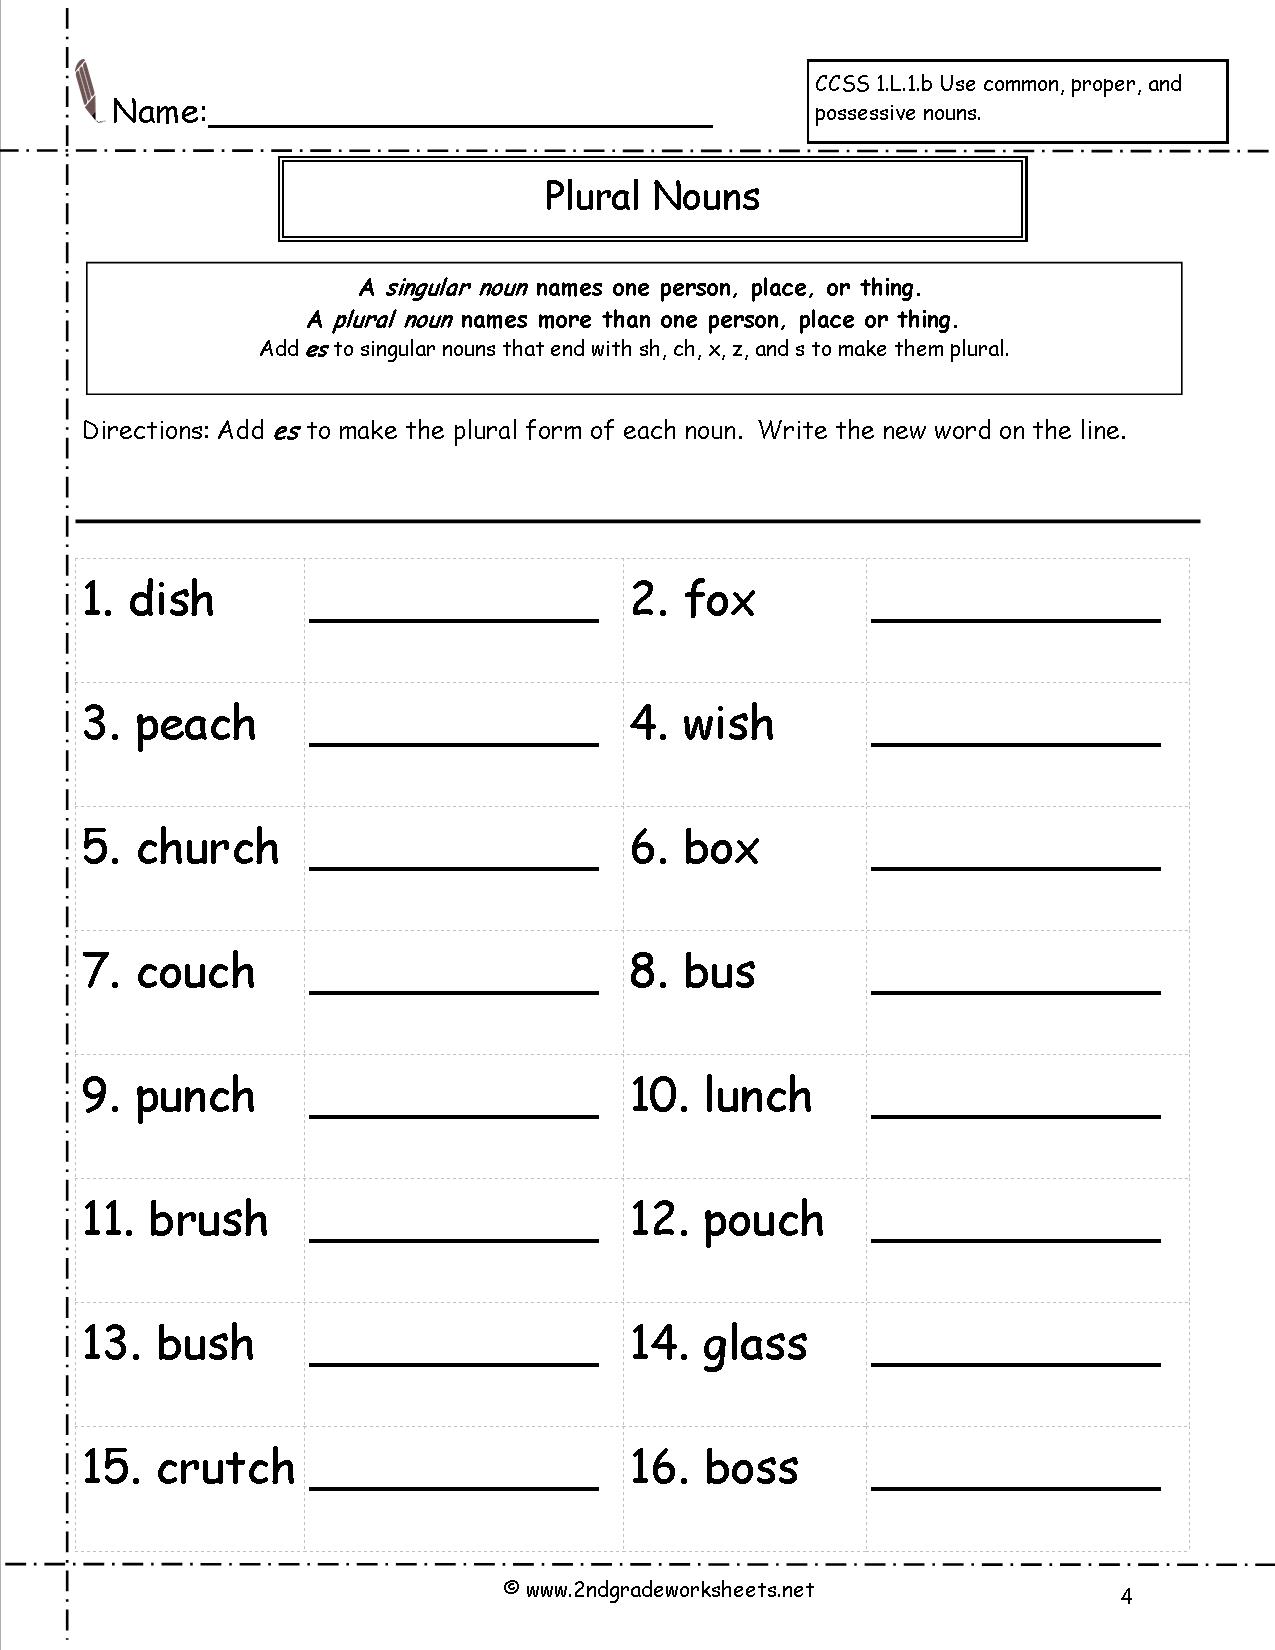 Free Puzzle Worksheets On Plurals For 3rd 4th Grades